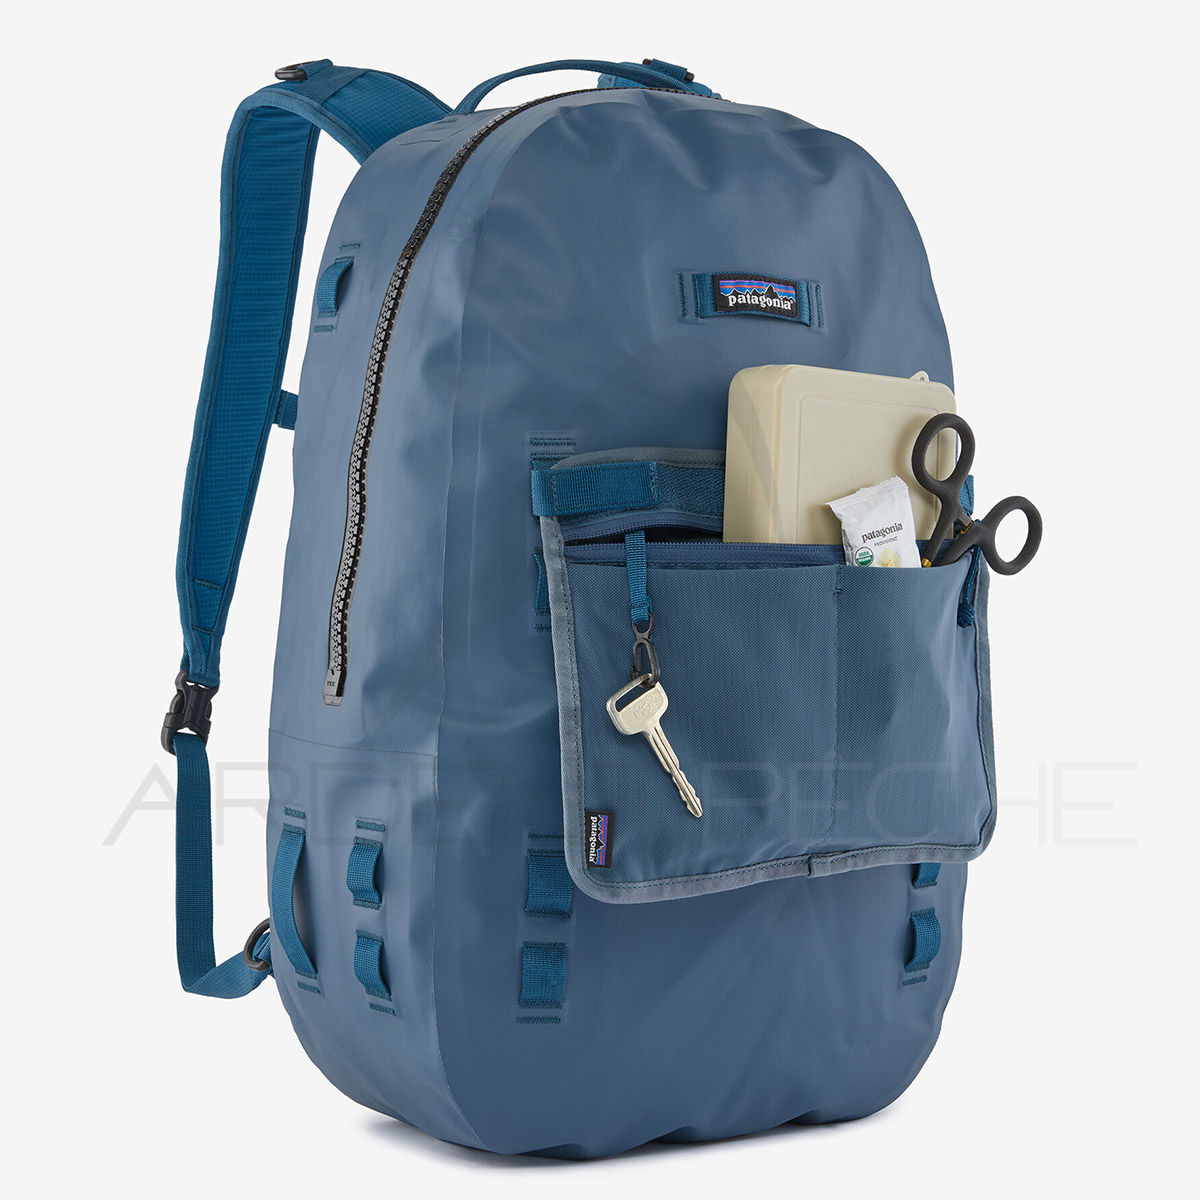 https://www.ardentflyfishing.com/Image/73682/1200x1200/sac-a-dos-patagonia-guidewater-backpack-29l-pigeon-blue.jpg